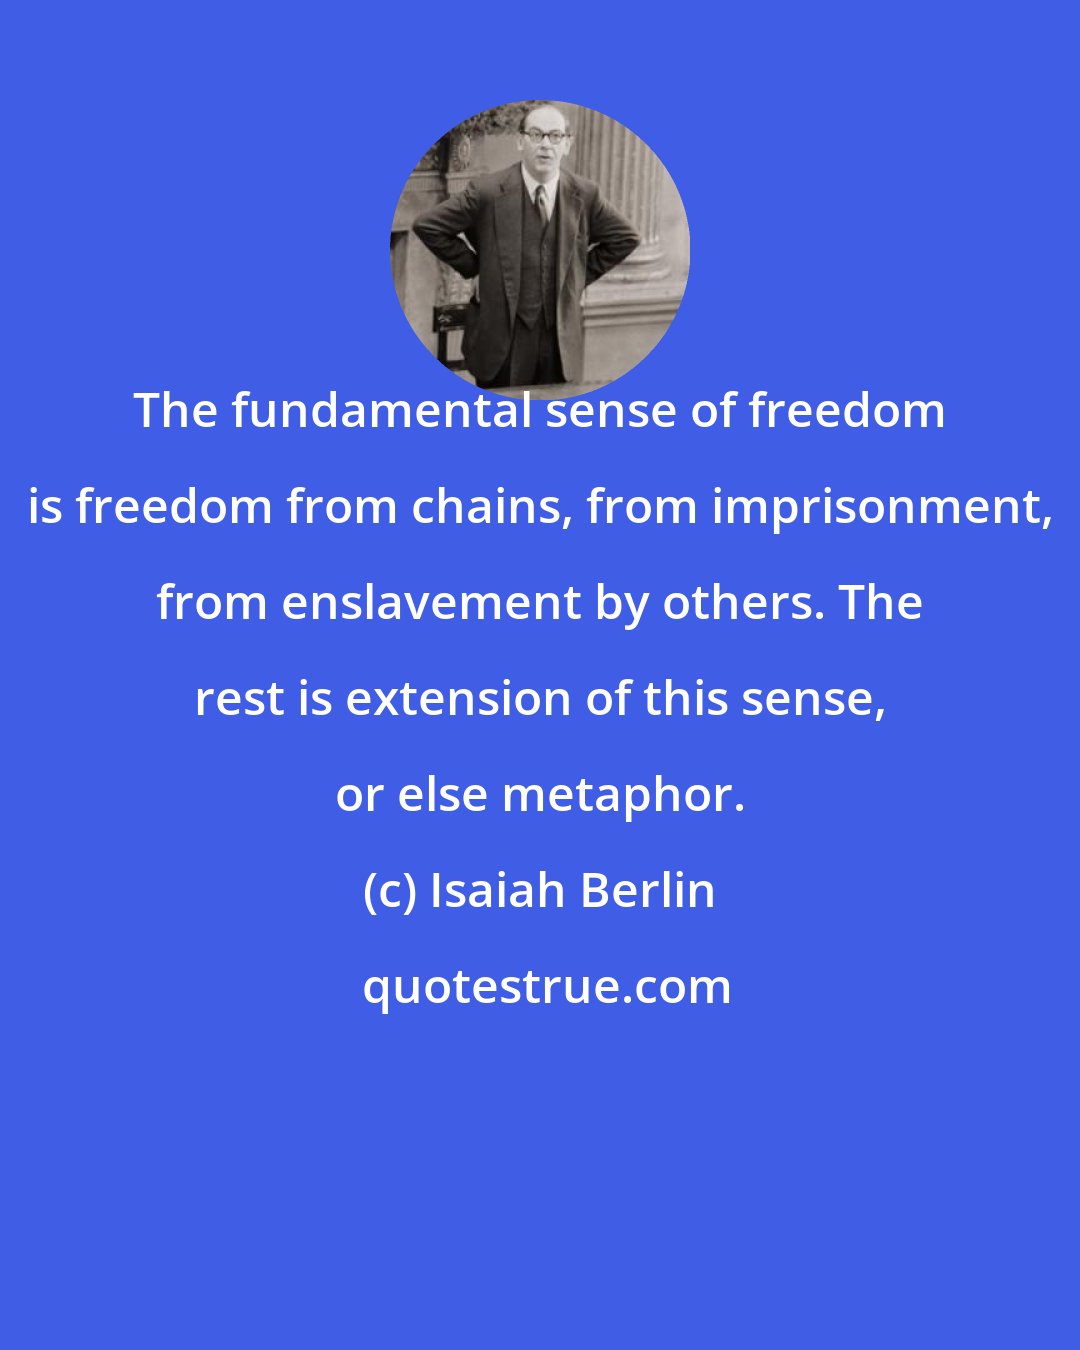 Isaiah Berlin: The fundamental sense of freedom is freedom from chains, from imprisonment, from enslavement by others. The rest is extension of this sense, or else metaphor.